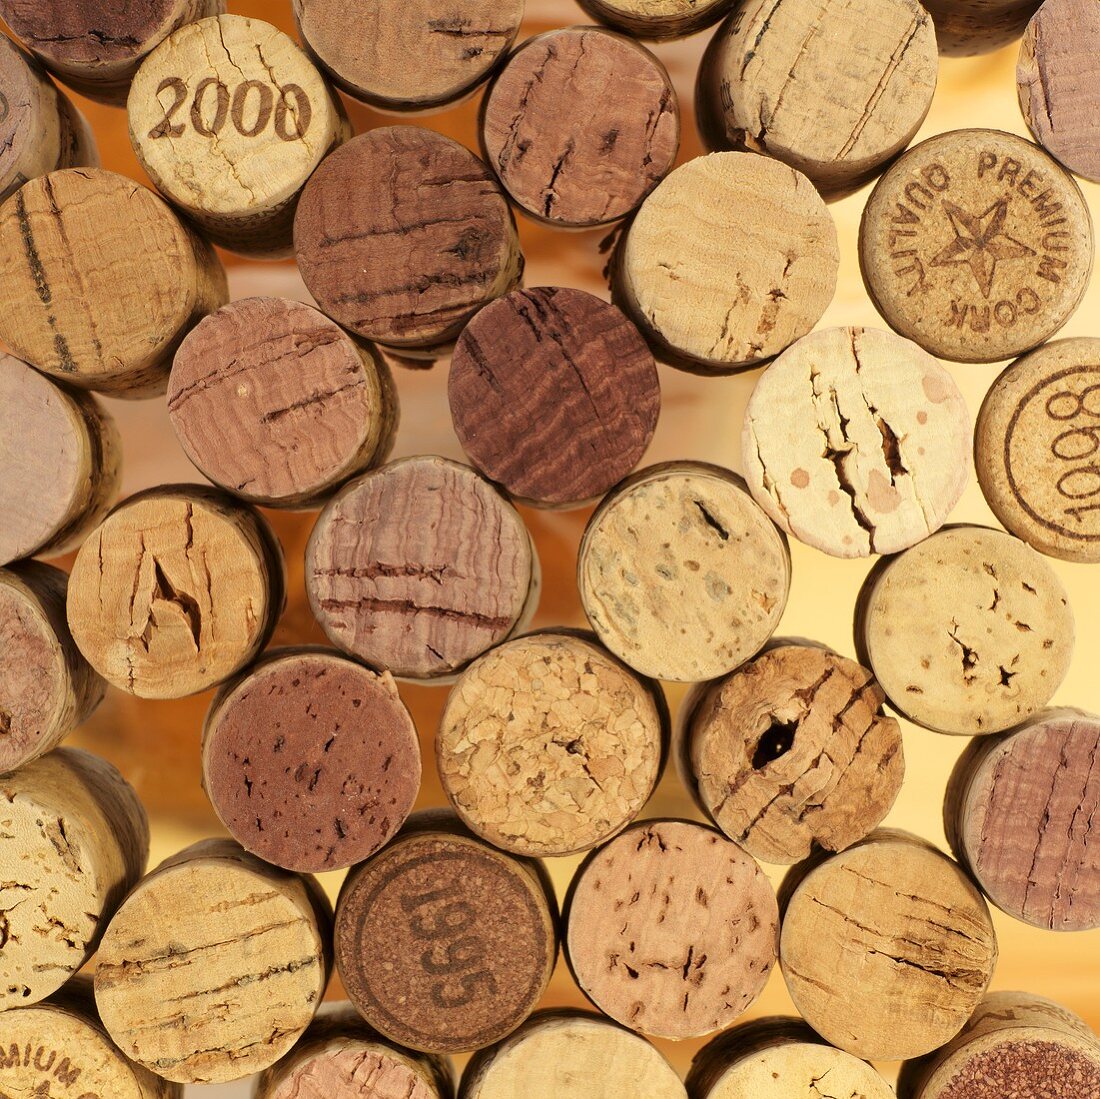 Assorted wine corks from above